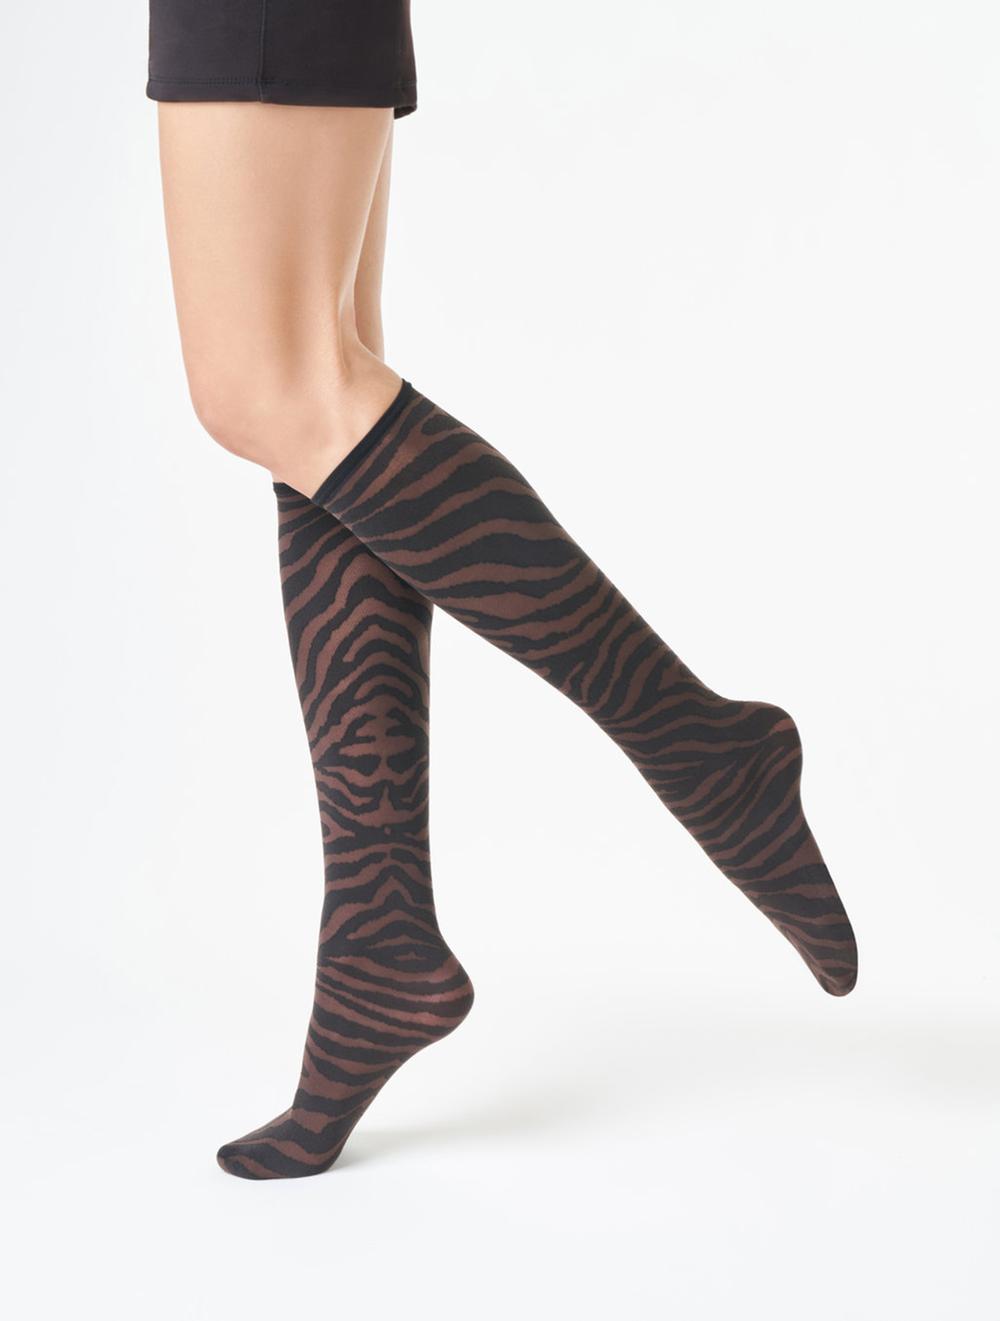 SiSi Zebrato Gambaletto - Brown micro mesh tulle effect fashion knee length socks with a black opaque woven zebra print pattern.